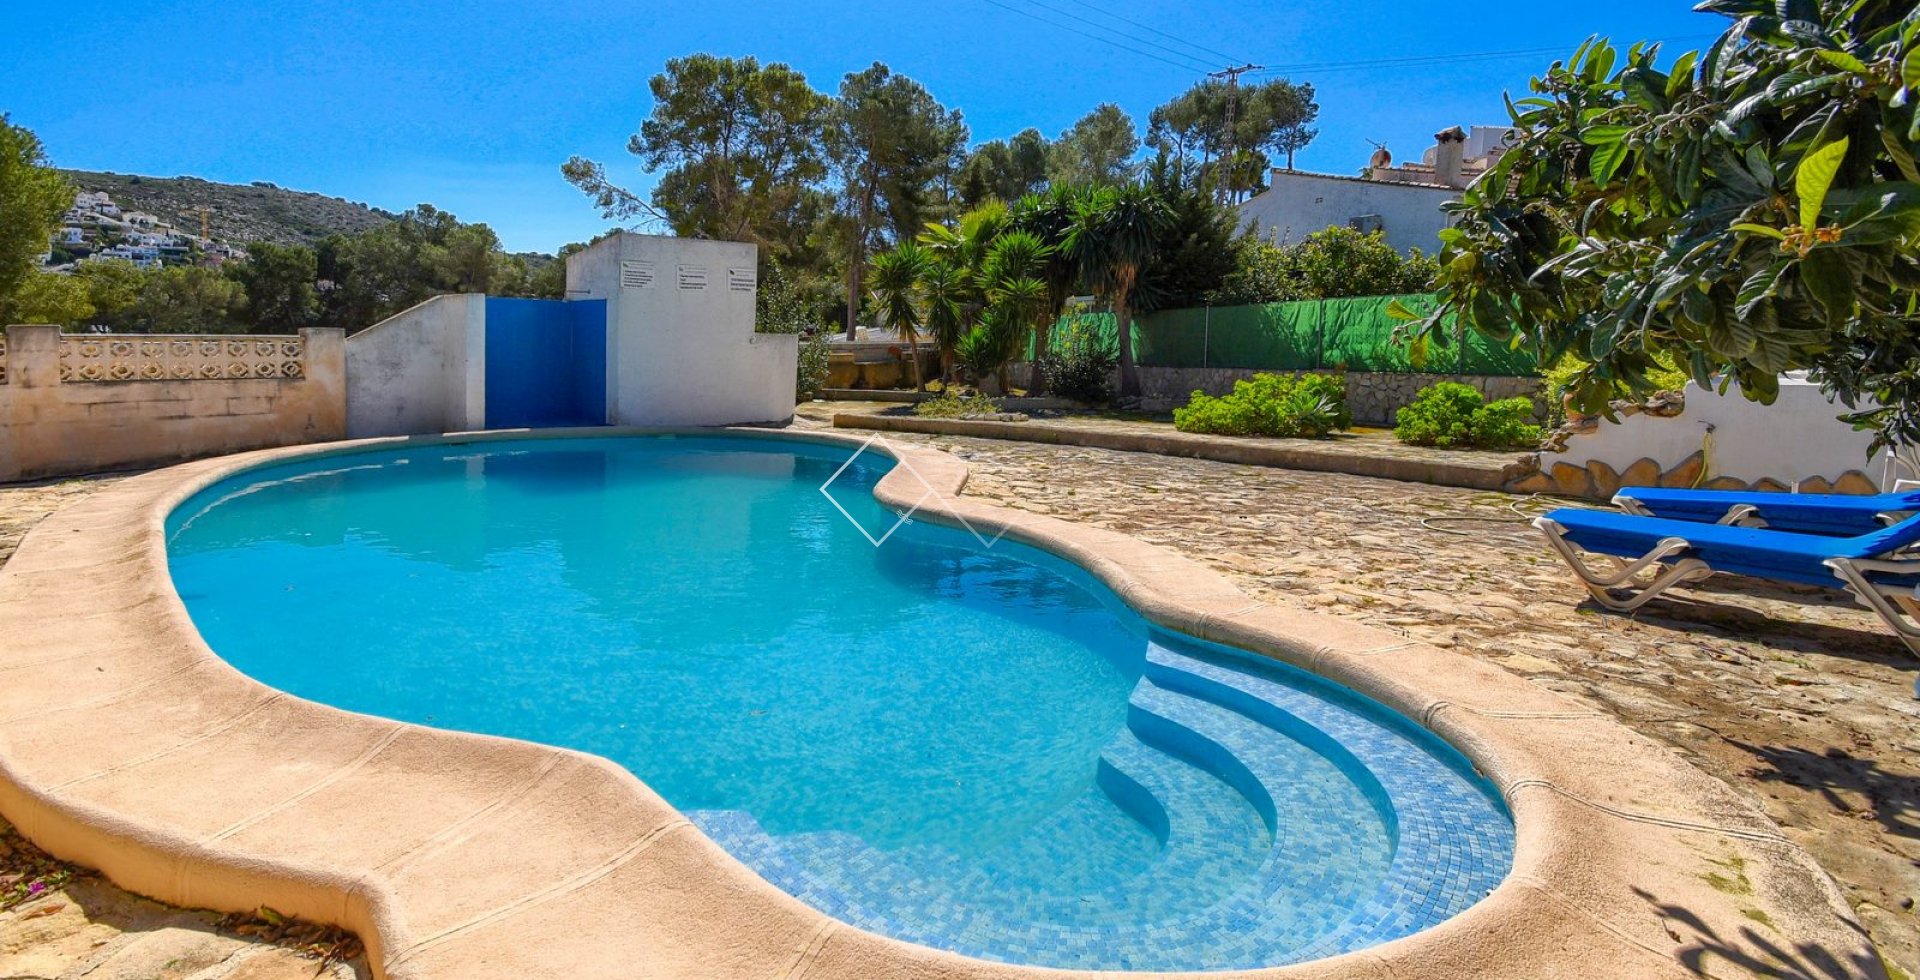 Pool - Attached house for sale in Moraira, El Portet